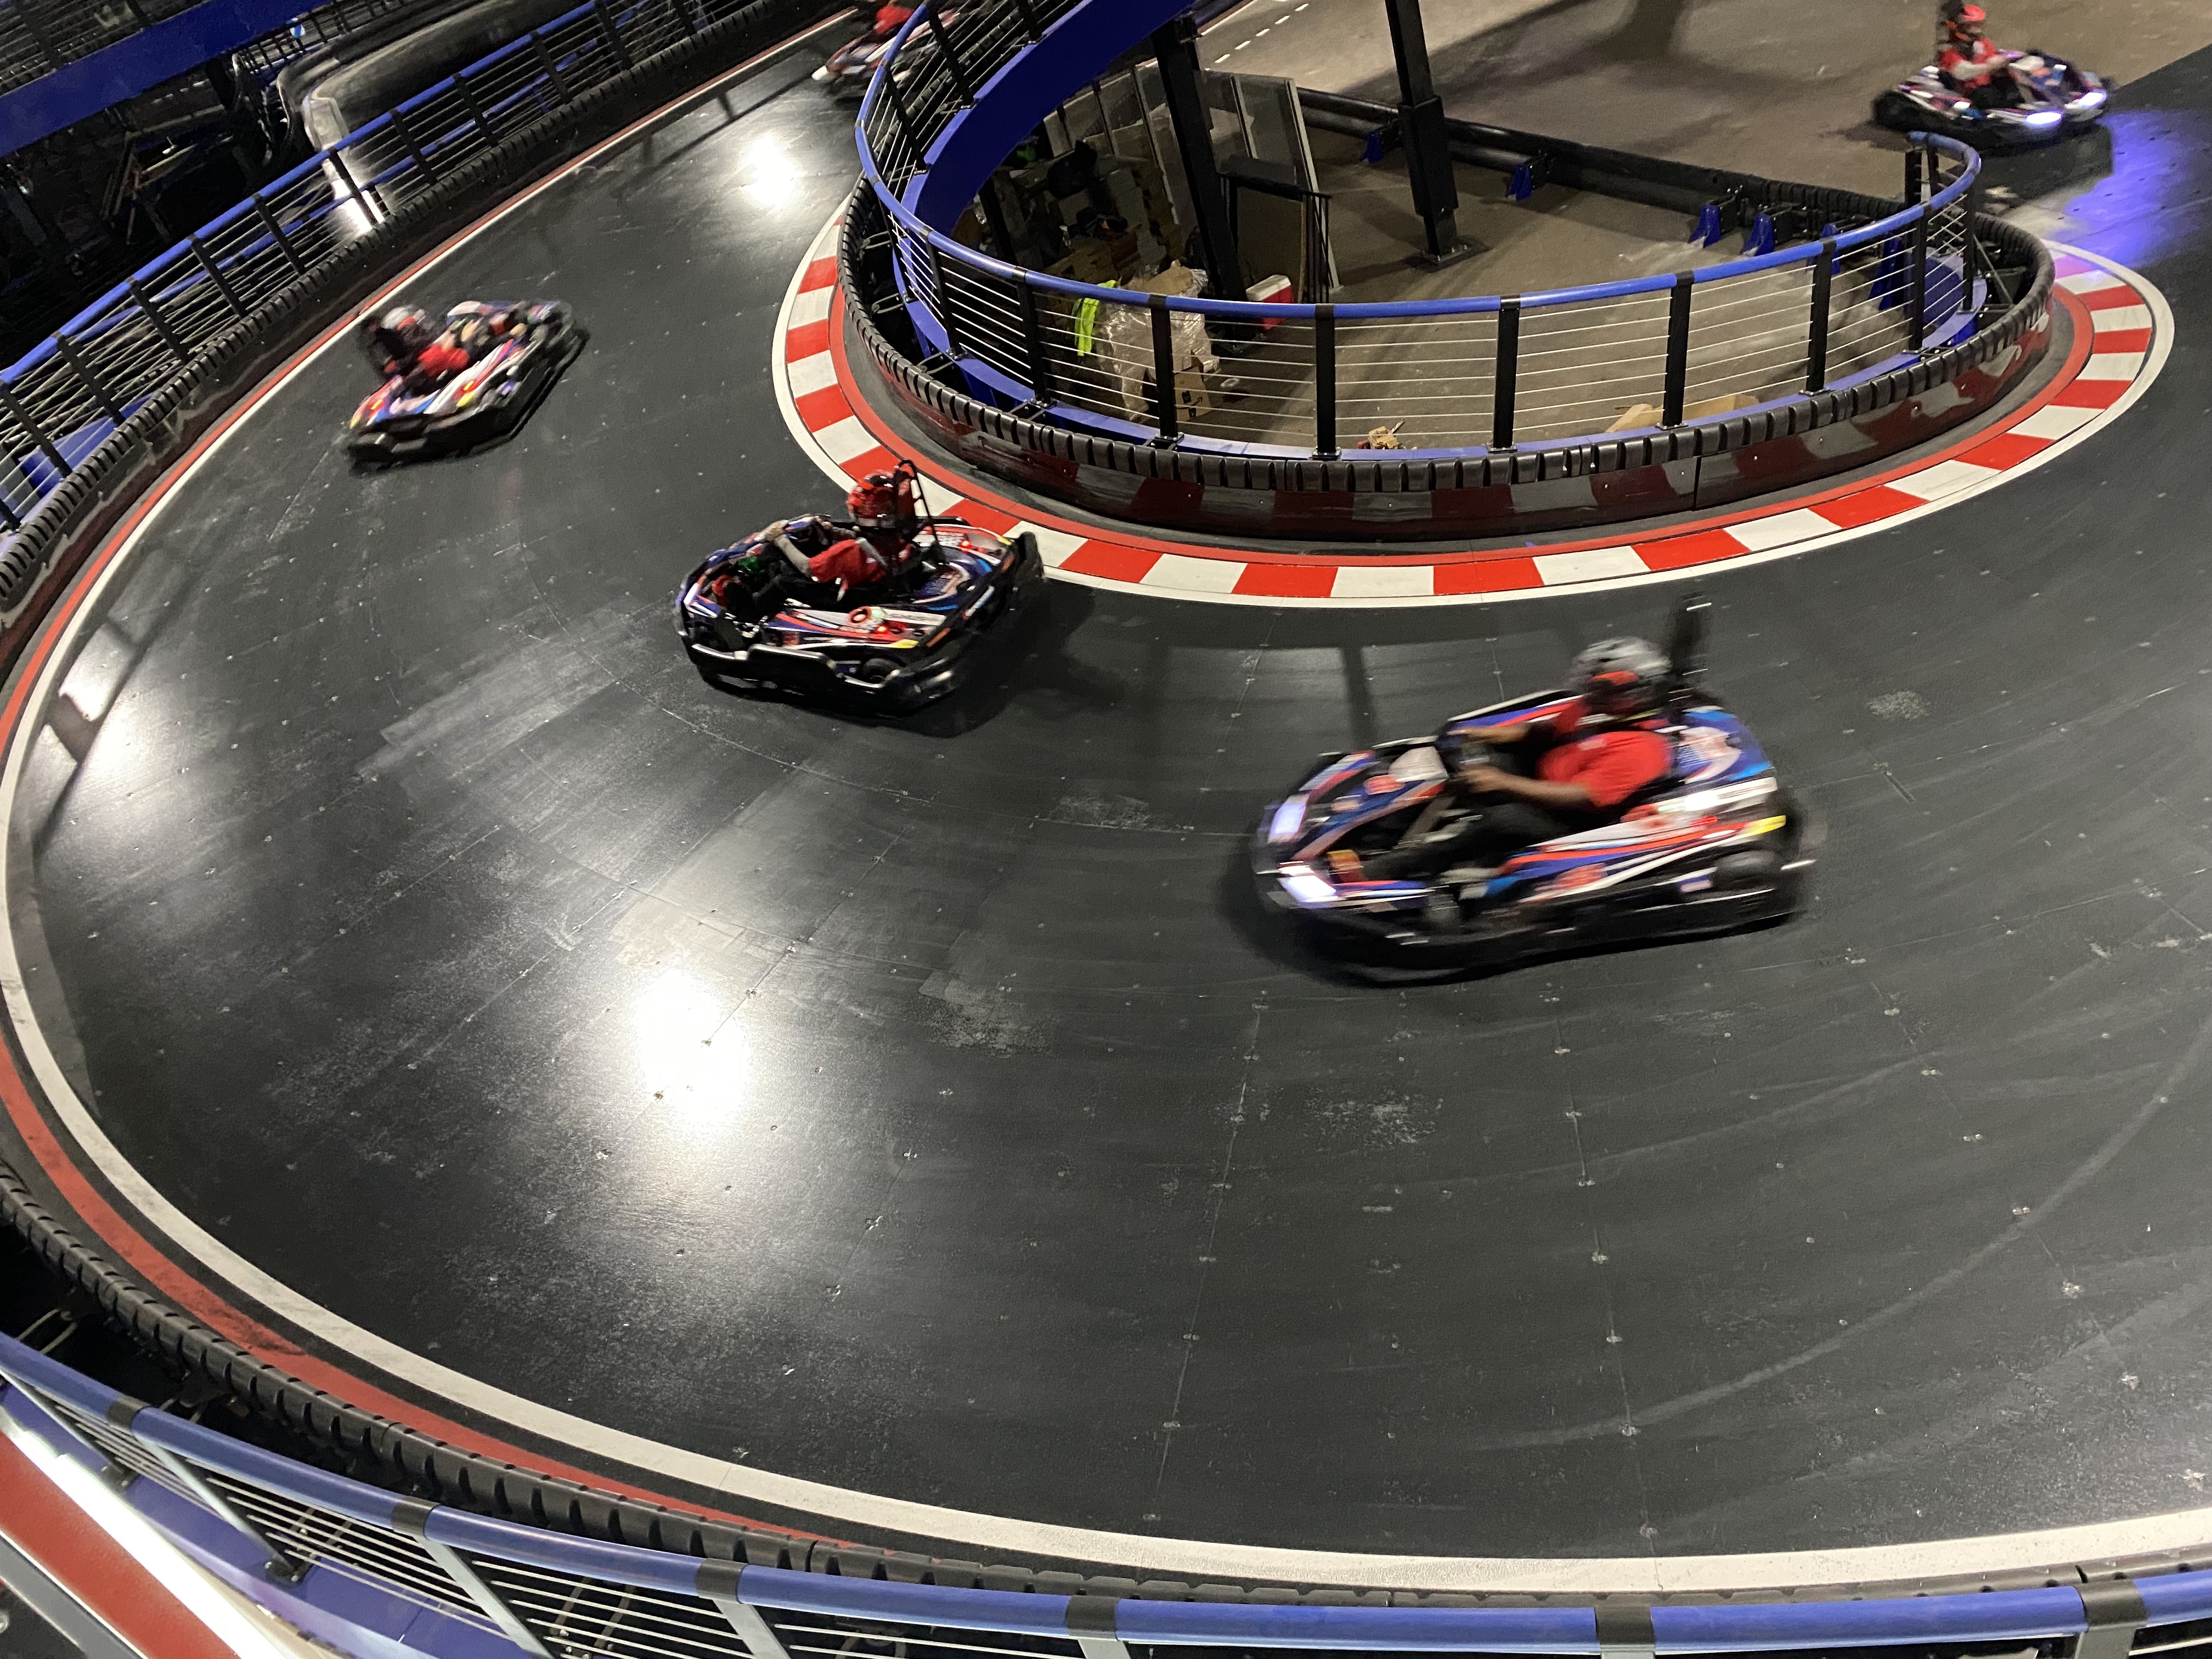 Go-karts in New Jersey: Massive Supercharged Entertainment facility to open  in Edison in December